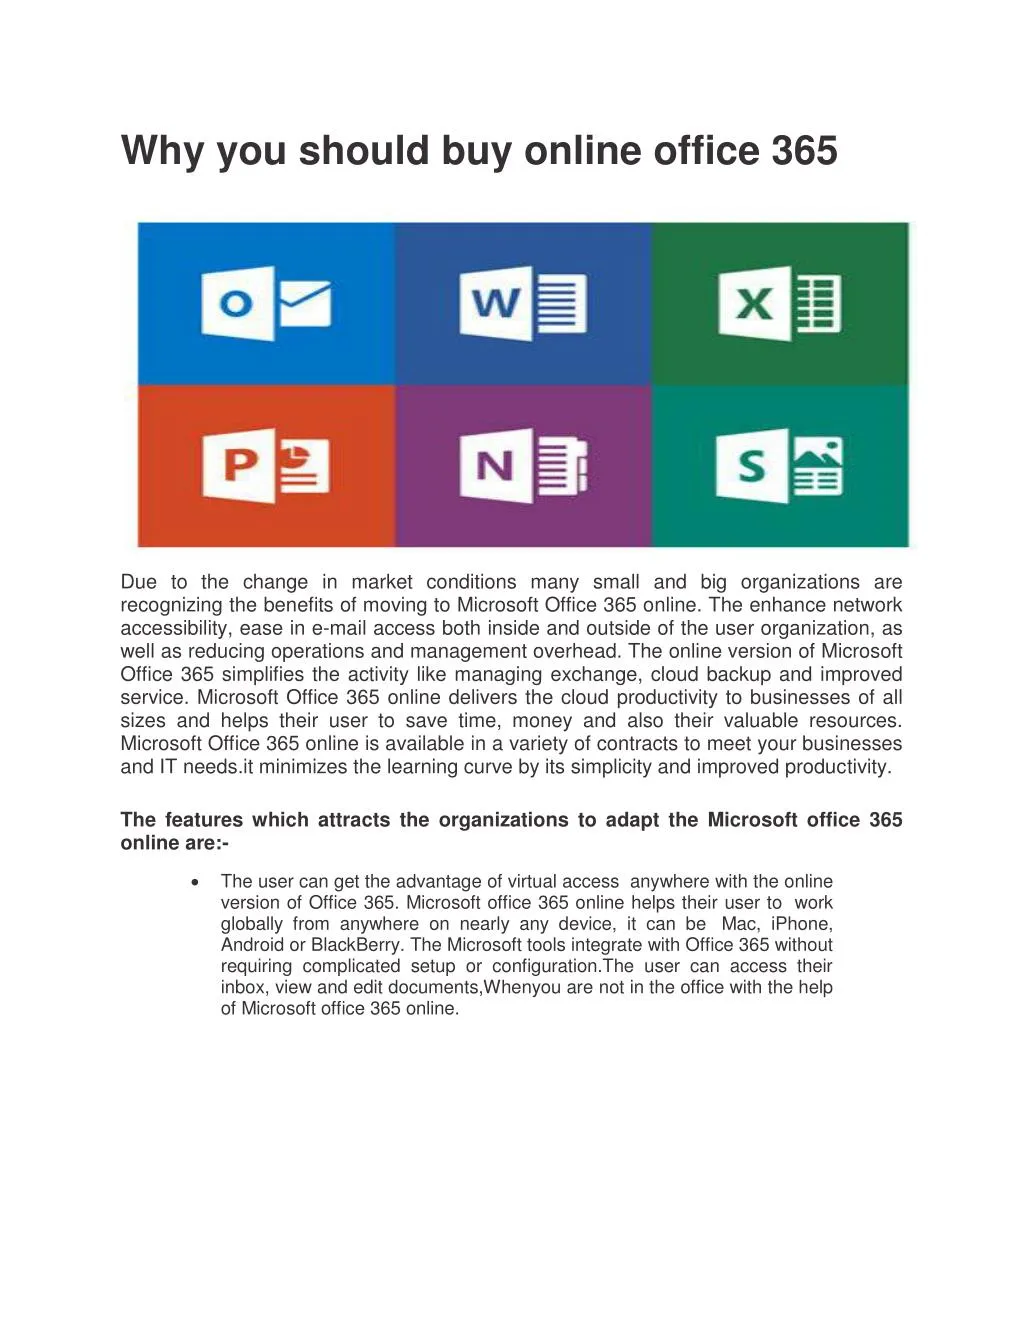 why you should buy online office 365